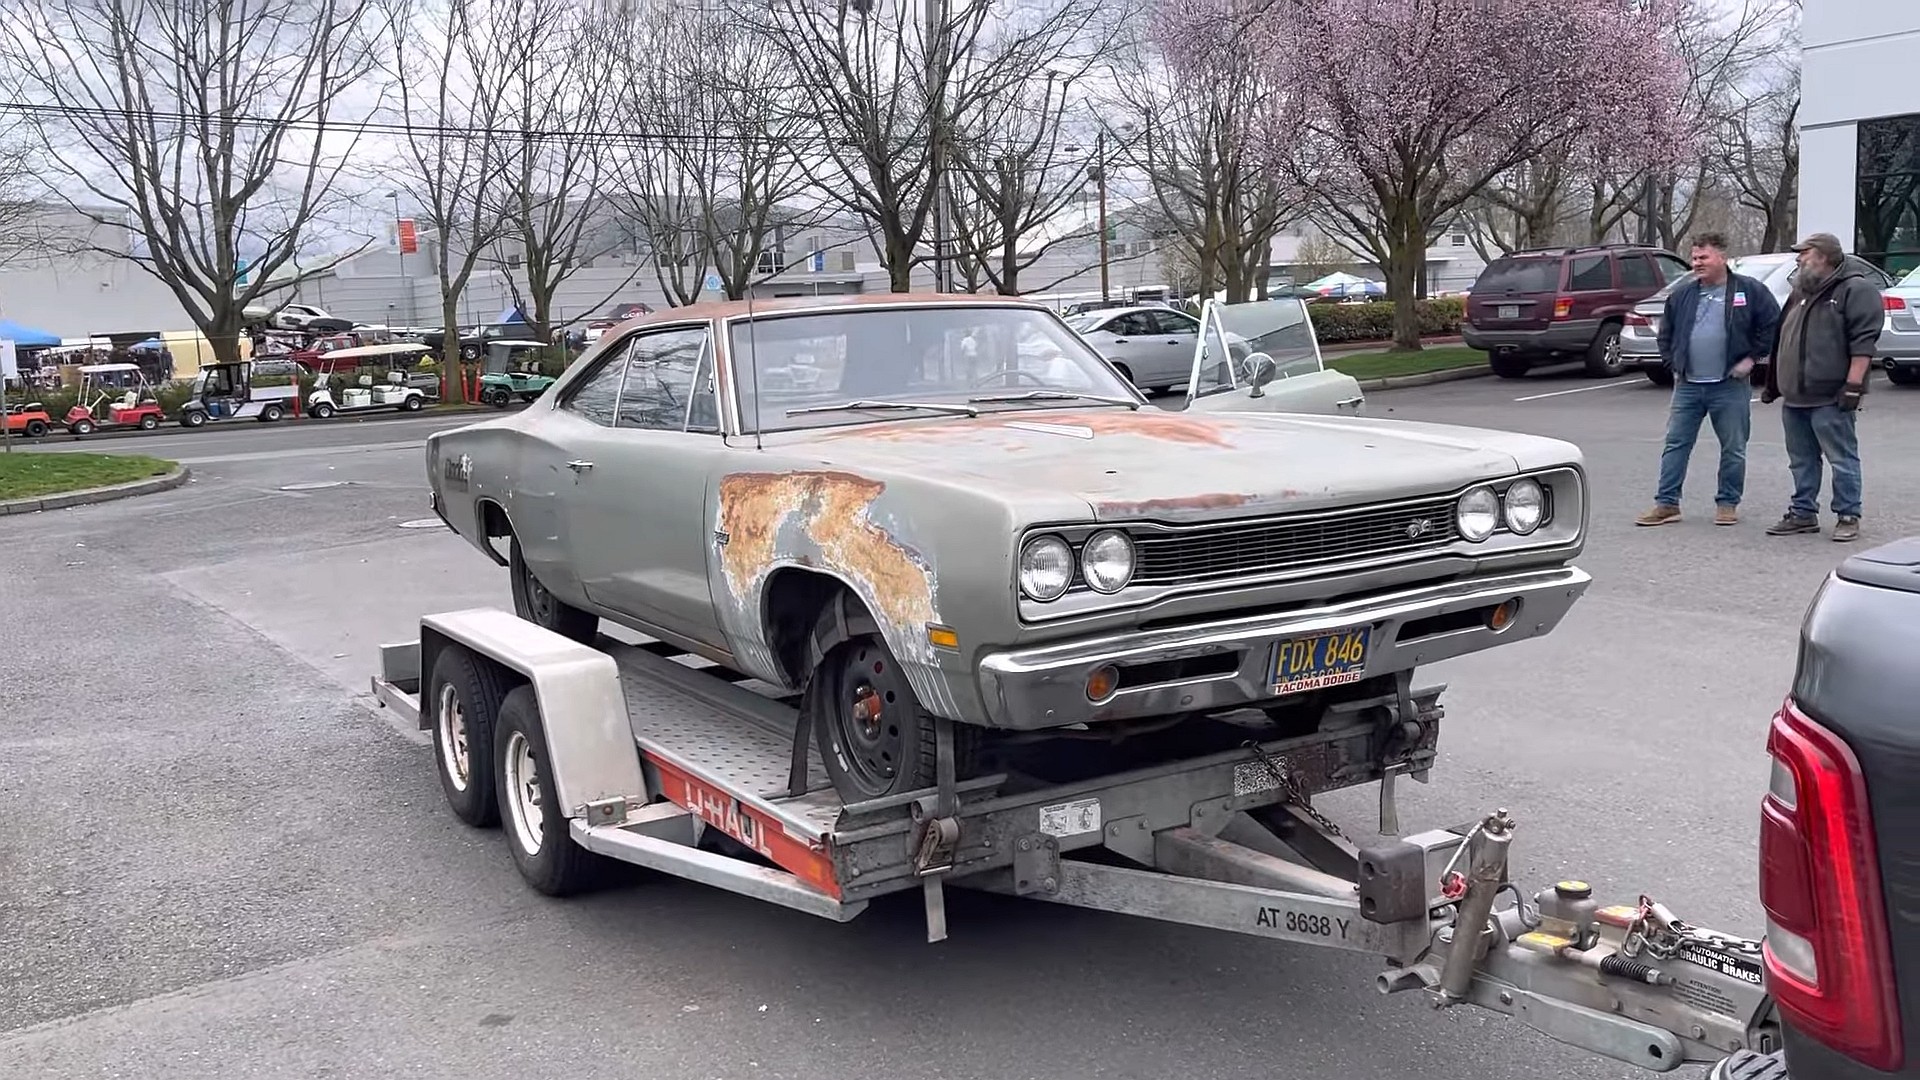 1969 Dodge Super Bee Barn Find Emerges After 20 Years With Super Rare Color Combo - autoevolution